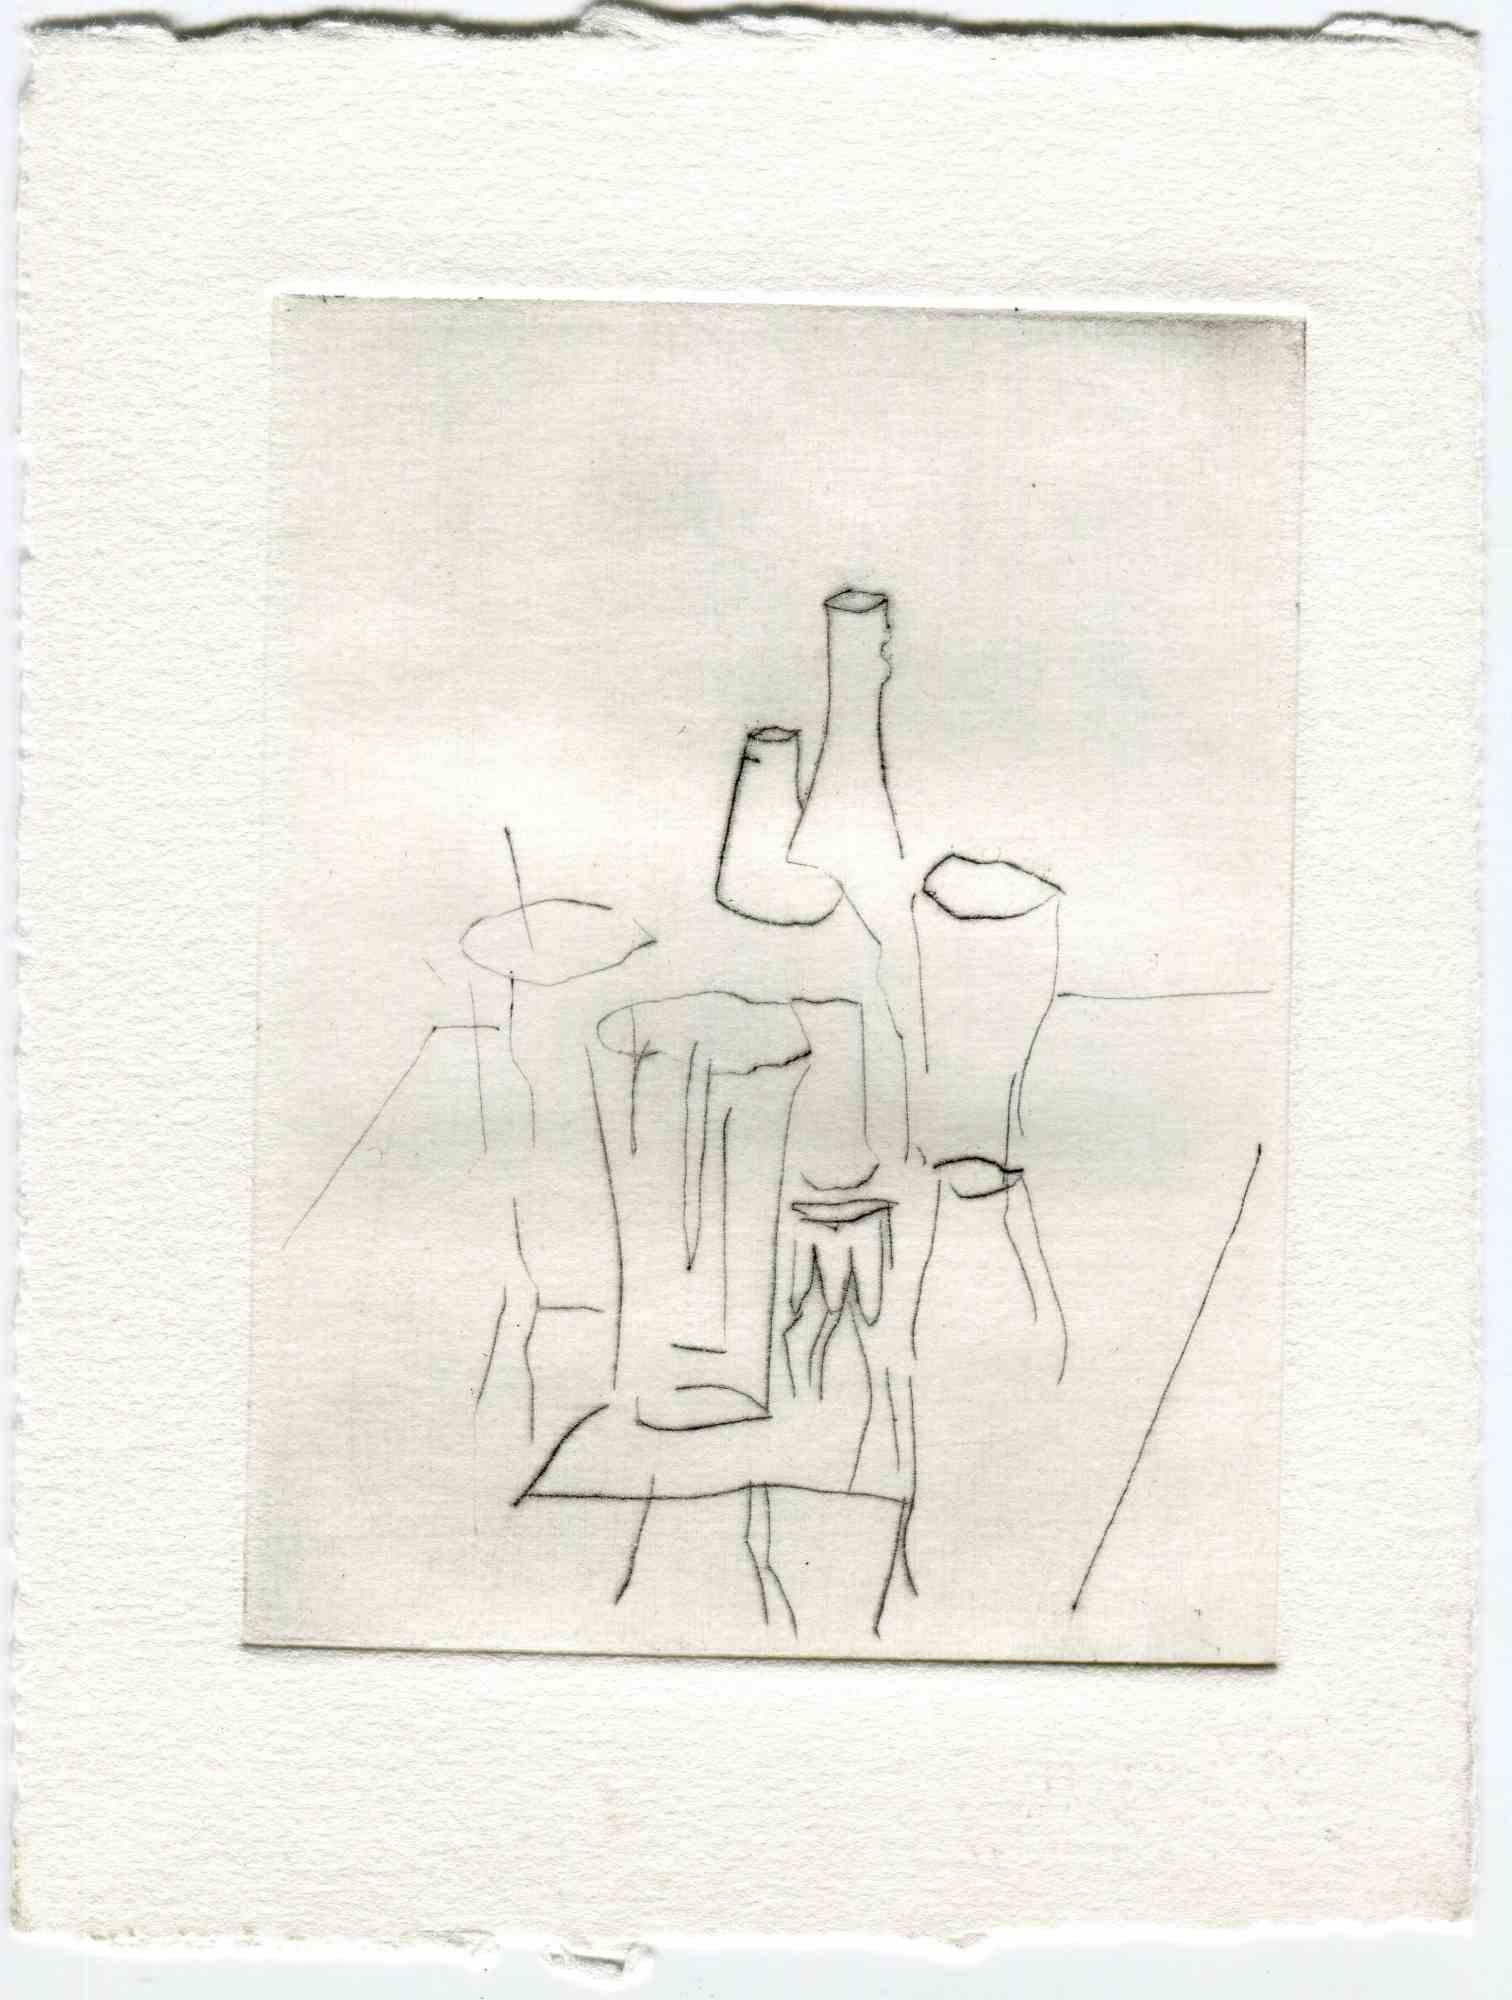 Unknown Figurative Print - Still Life - Original Etching and Drypoint - Mid-20th Century